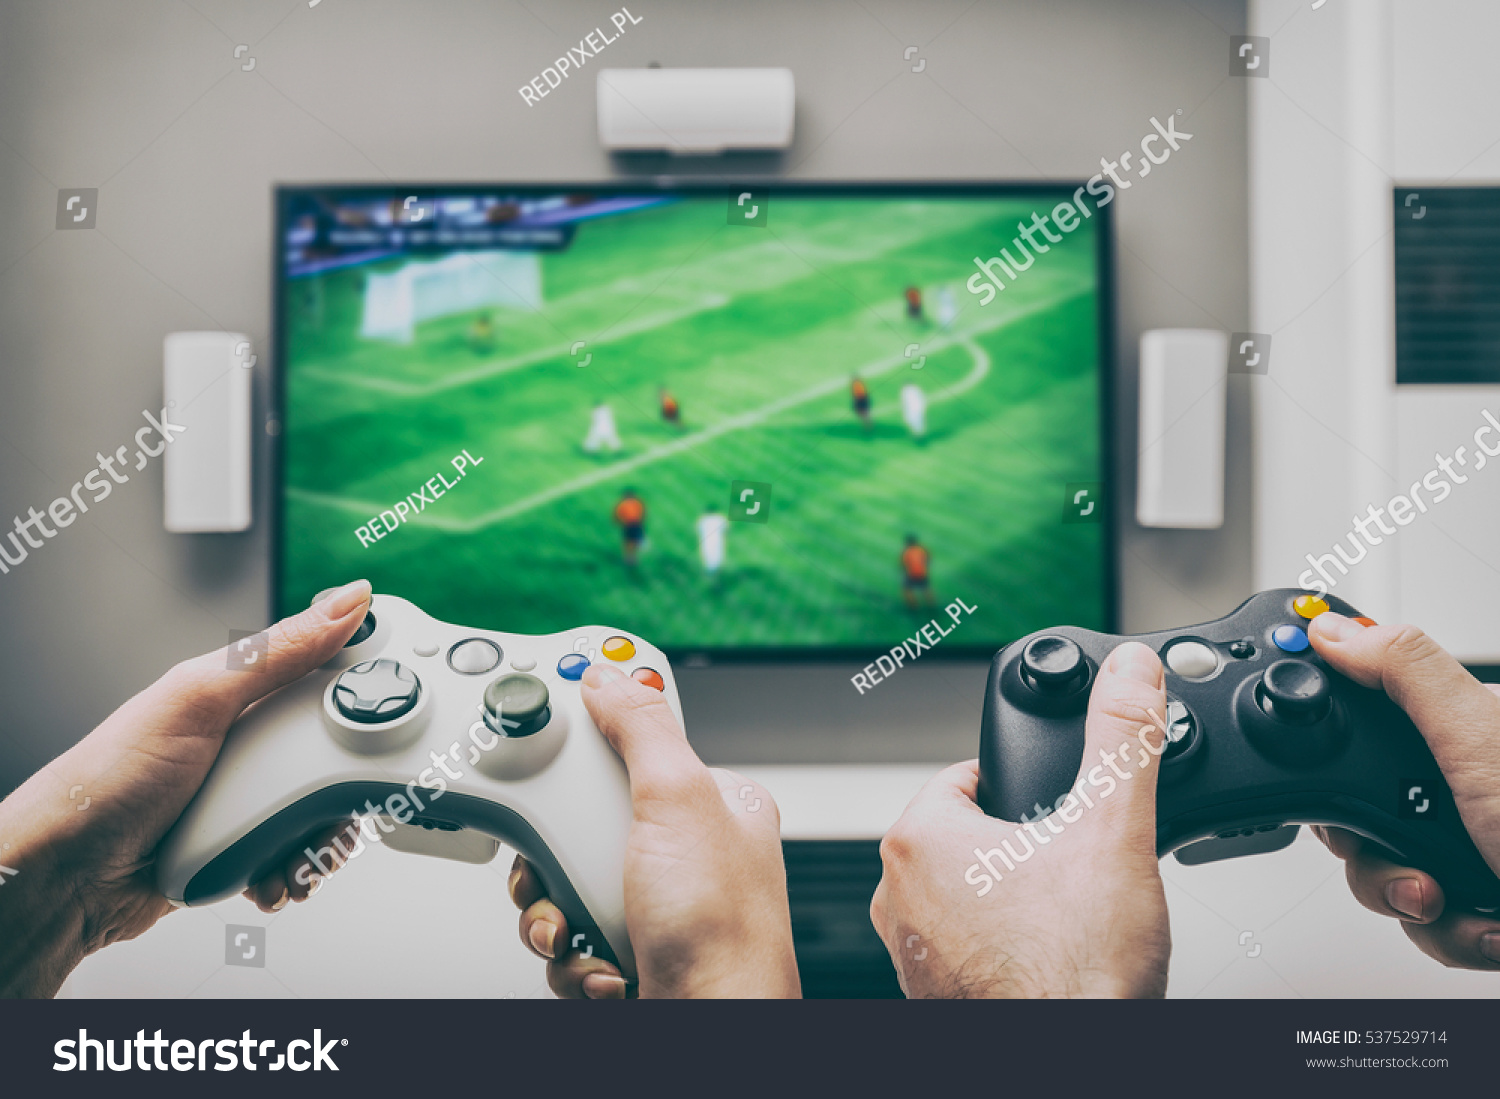 gaming game play tv fun gamer gamepad guy controller video console playing player holding hobby playful enjoyment view concept - stock image #537529714